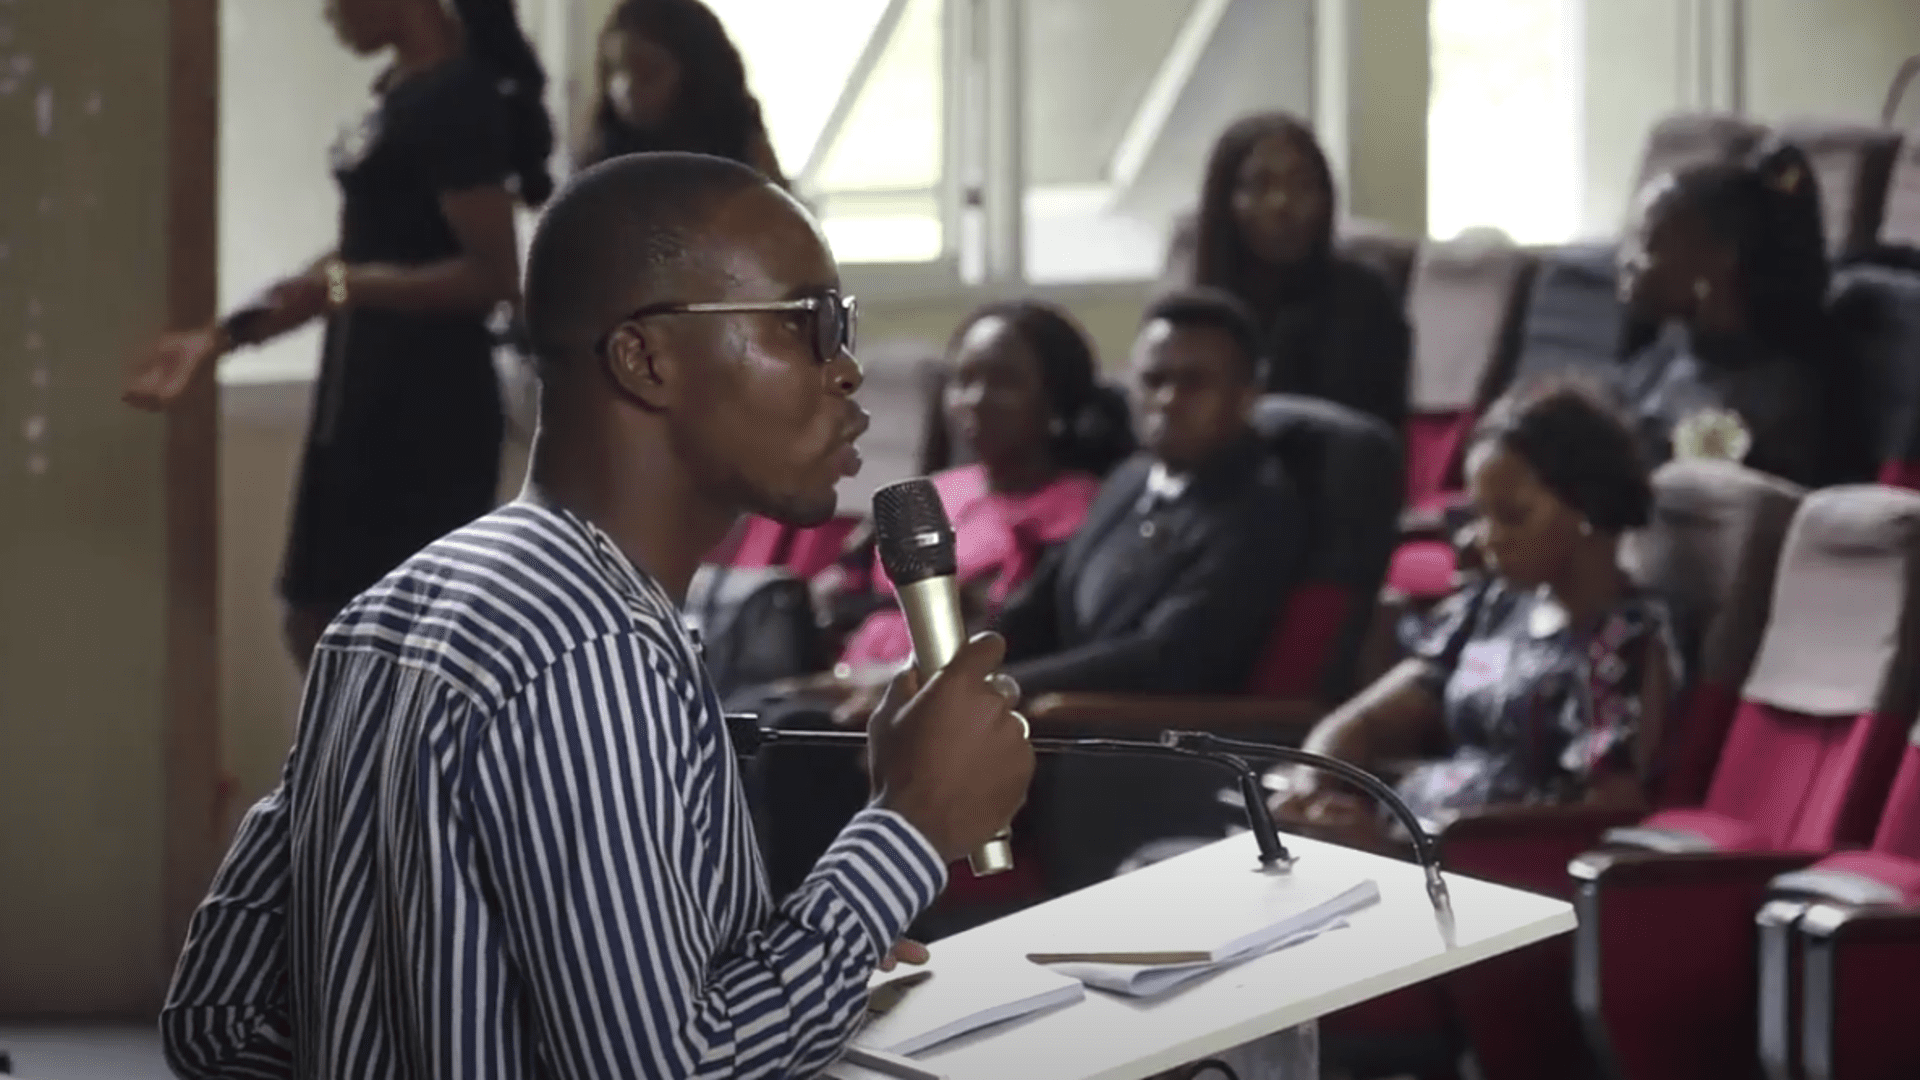 SFL alumnus Rowland Kingsley co-organizes Global Capitalism Awareness event in Nigeria, focusing on economic freedom, trade, and innovation